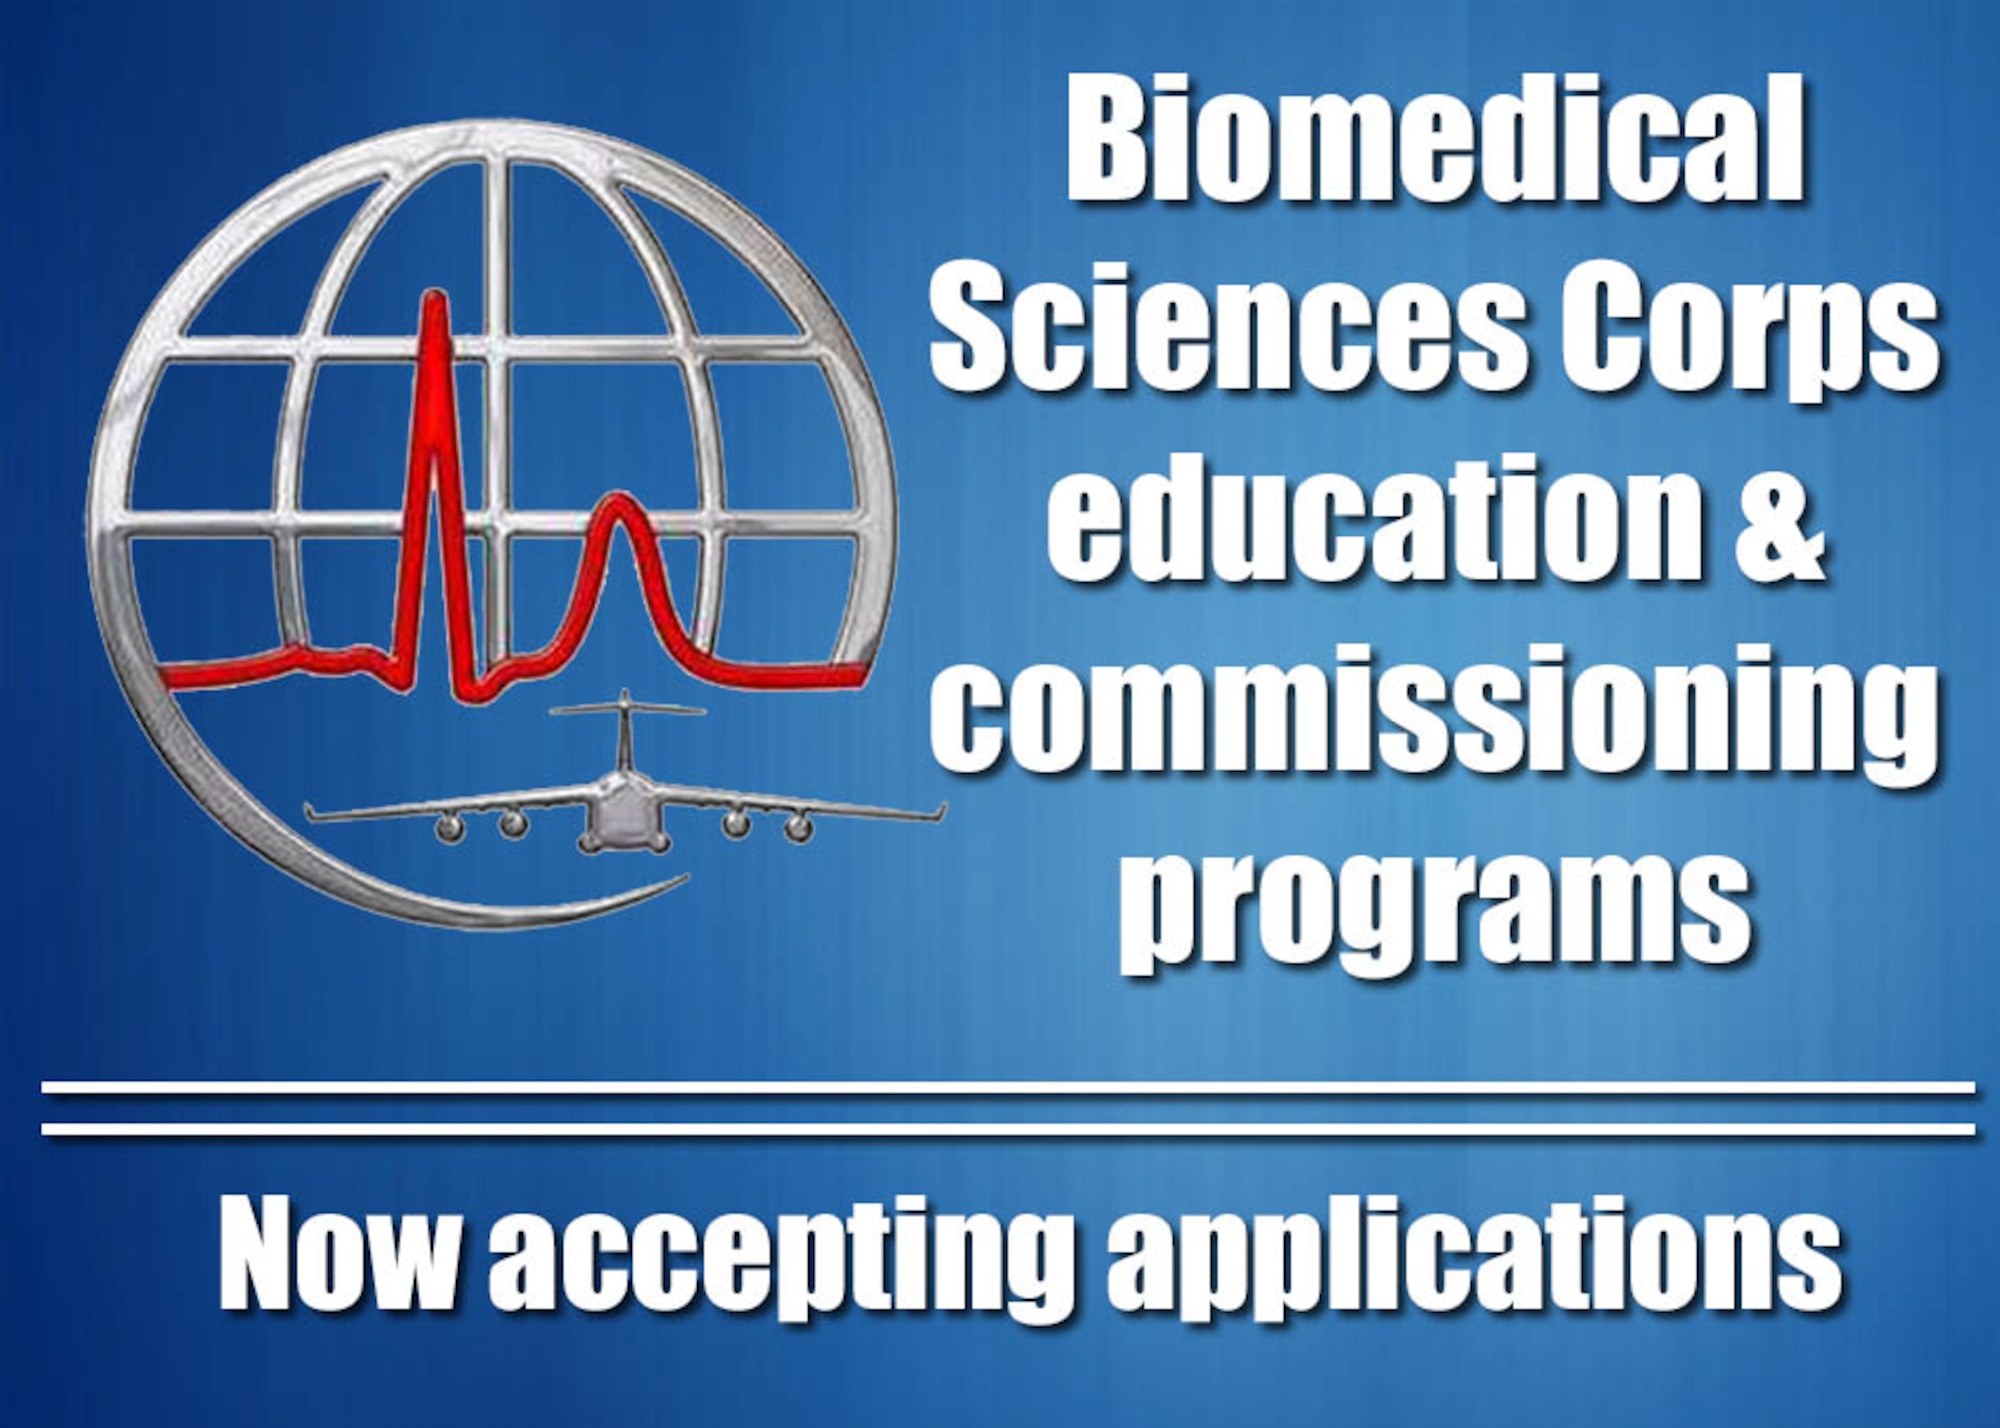 The Air Force is accepting applications from enlisted, commissioned and cadet Airmen interested in becoming a physician’s assistant, clinical psychologist, physical therapist, social worker, public health officer or bioenvironmental engineer through one of the Air Force’s biomedical education & commissioning programs. (AFPC courtesy graphic)